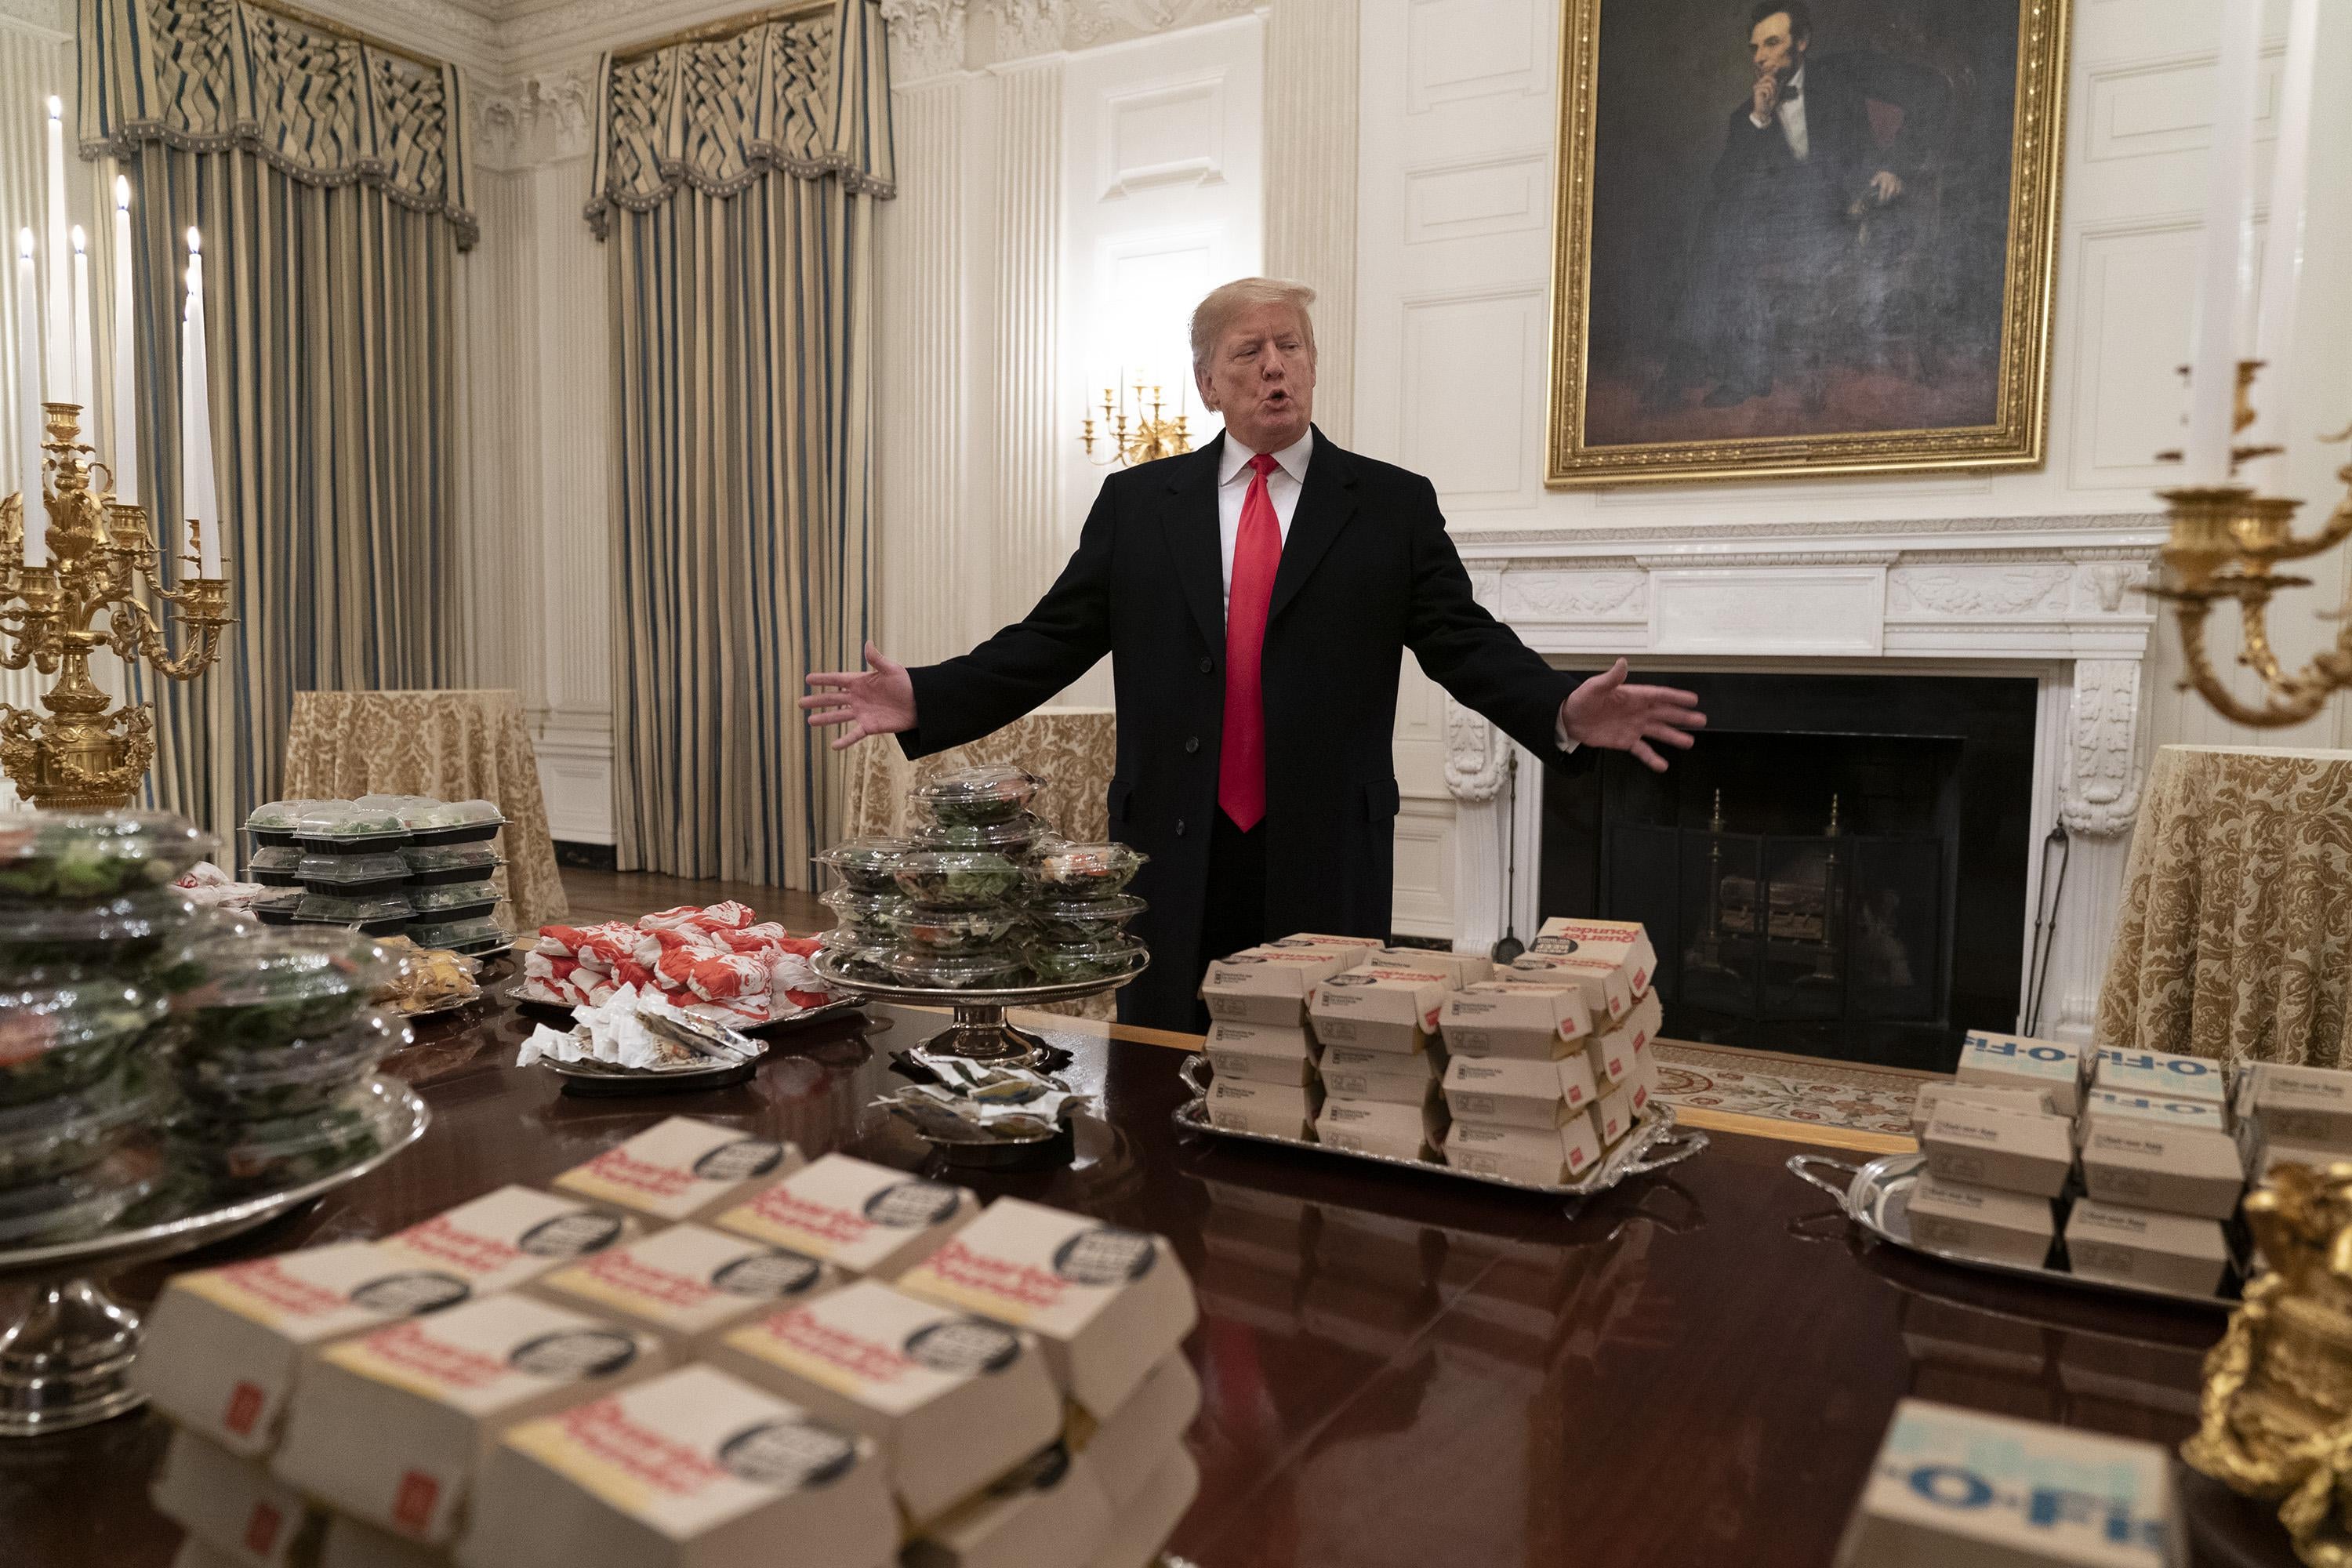 President Trump presents a table full of fast food.